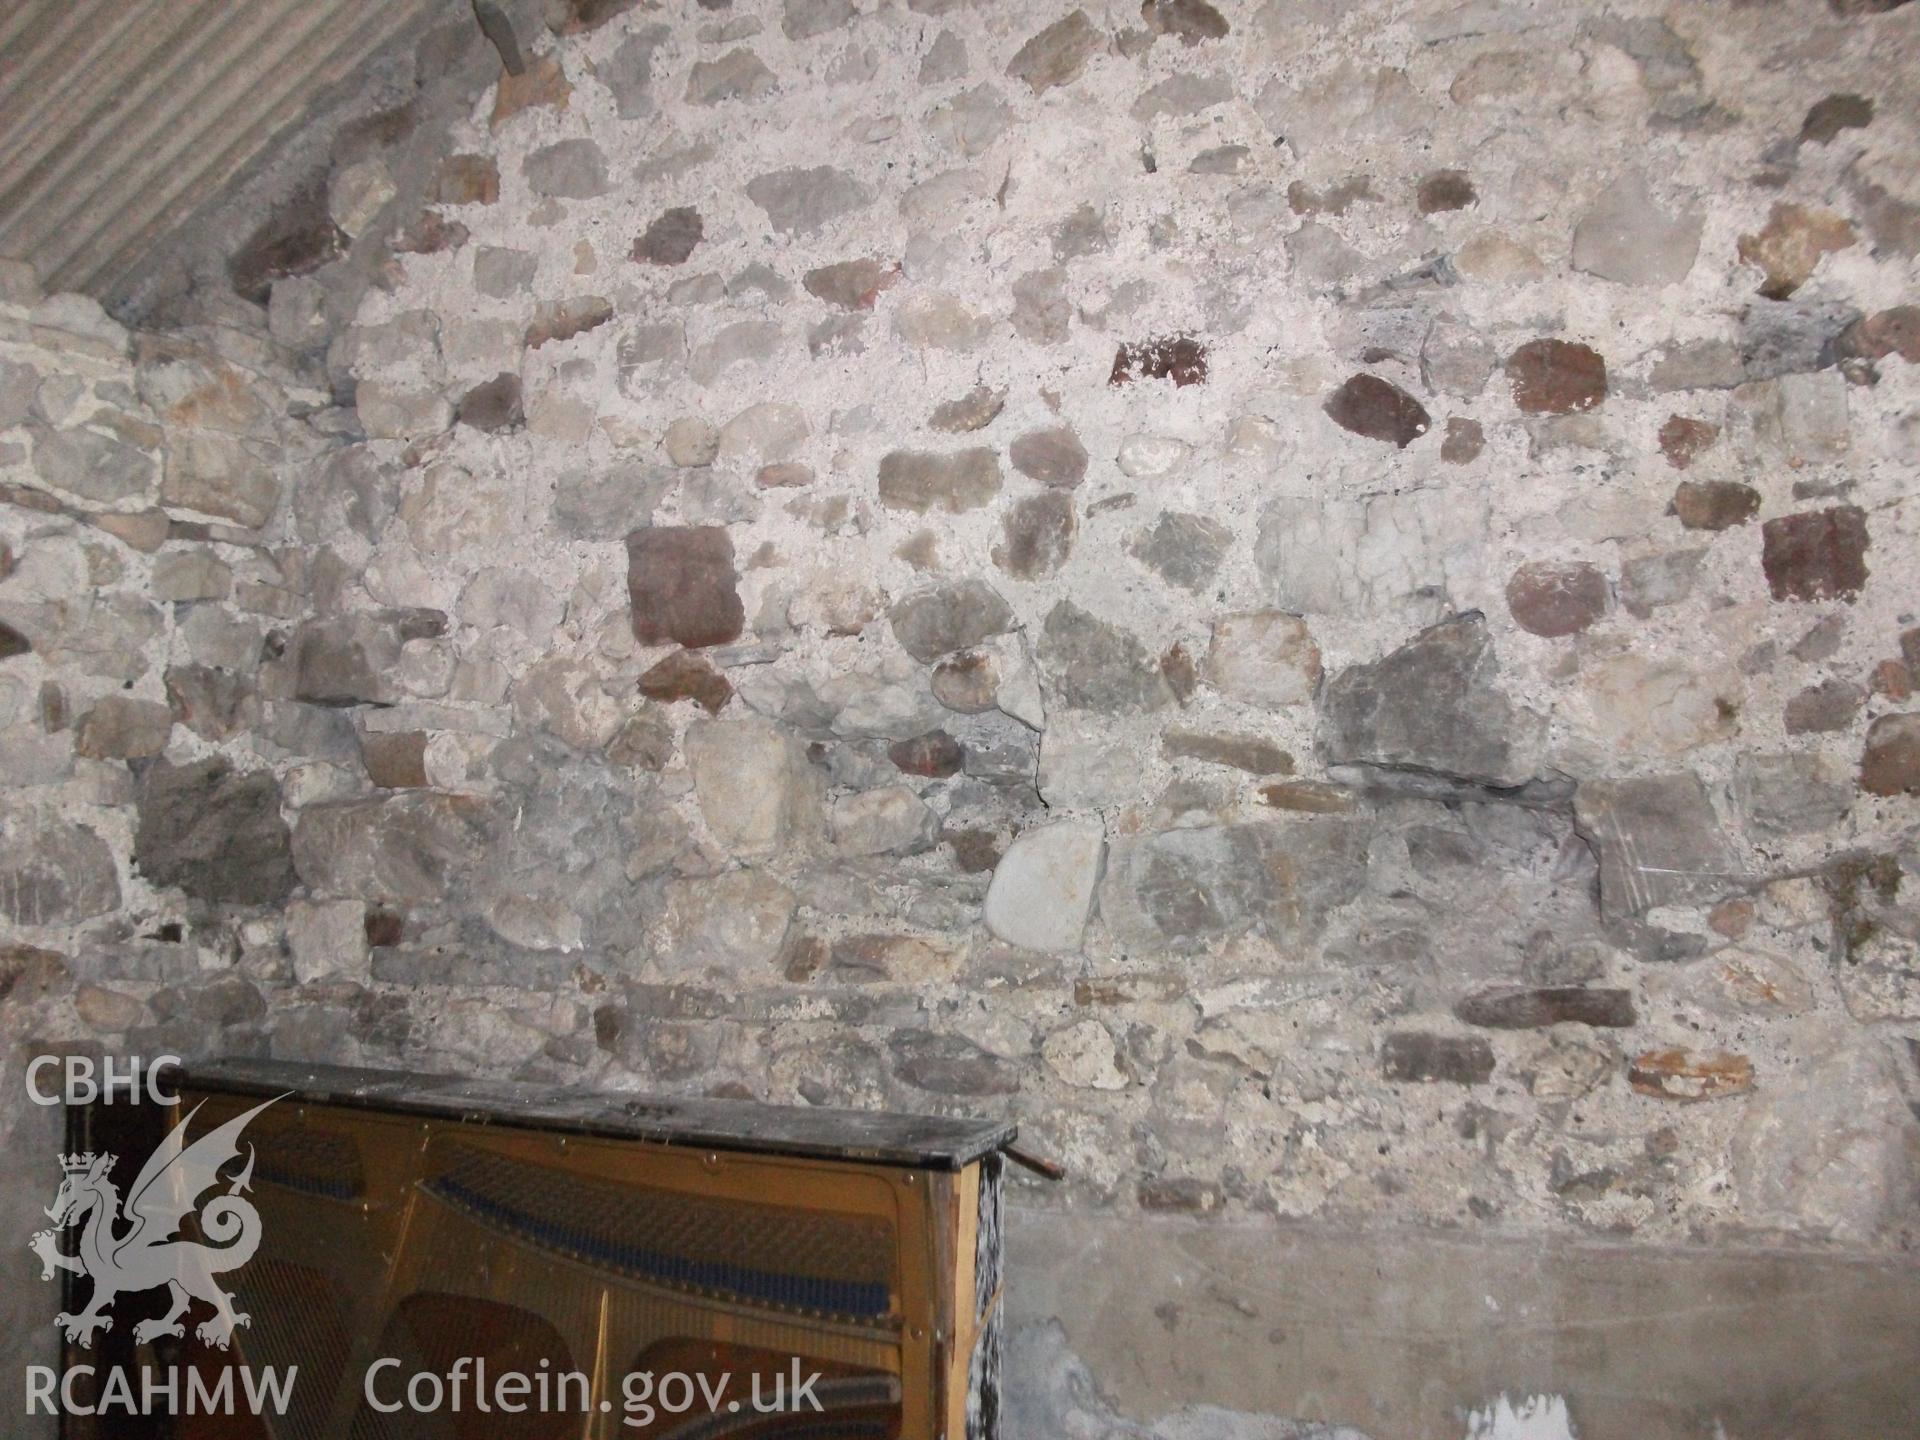 Photograph showing detailed interior view of ale and pail barn's stone wall, at Pant-y-Castell, Maesybont, Photographed by Mark Waghorn to meet a condition attached to planning application.